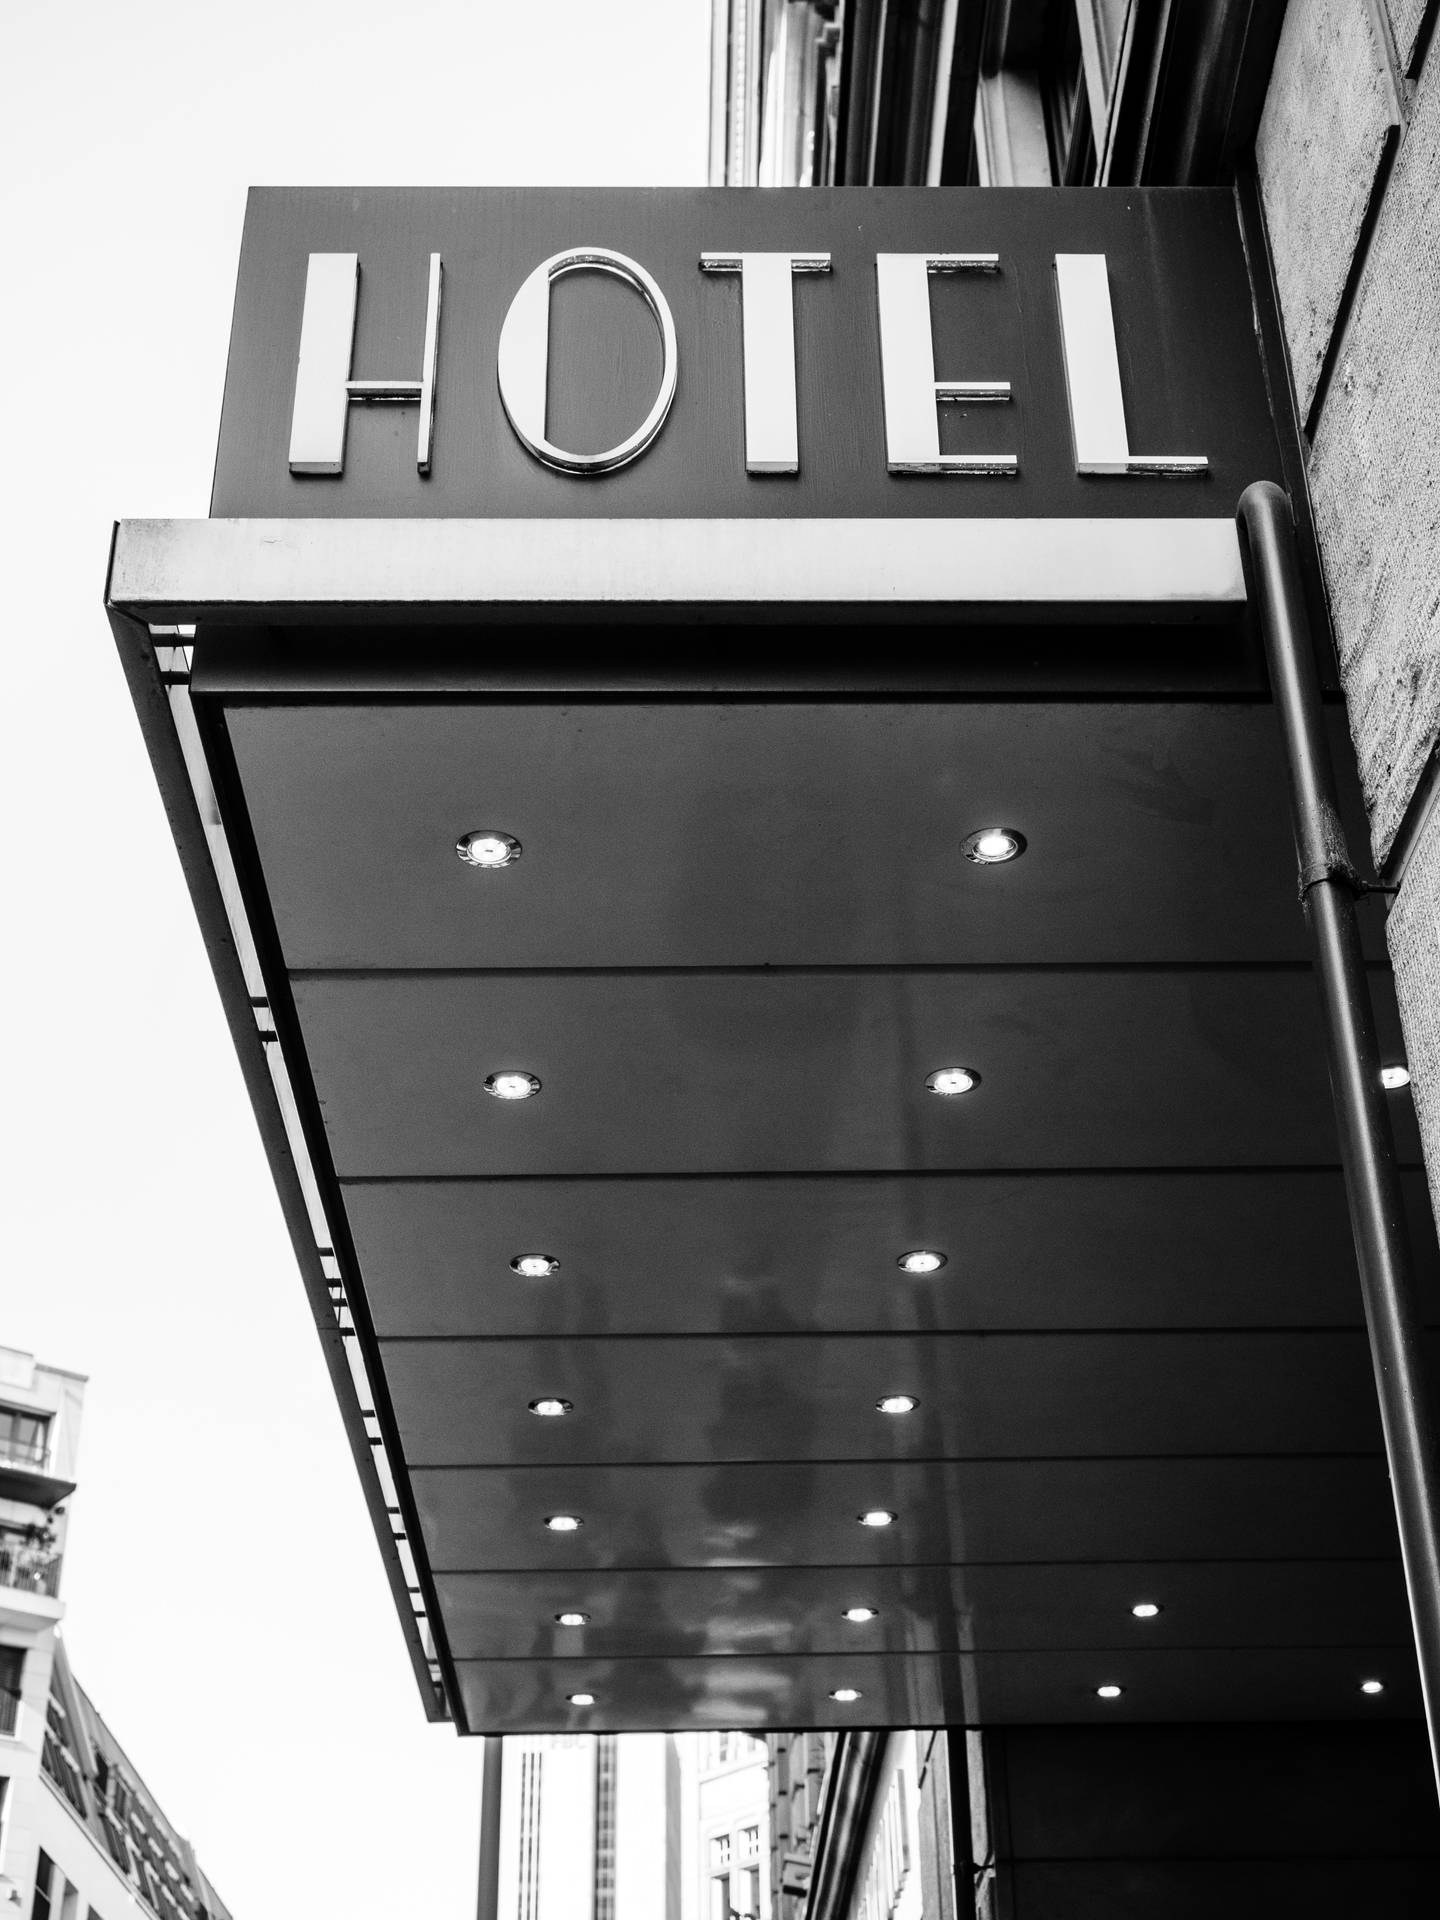 Captivating Grayscale Image of a Classic Hotel Sign Wallpaper